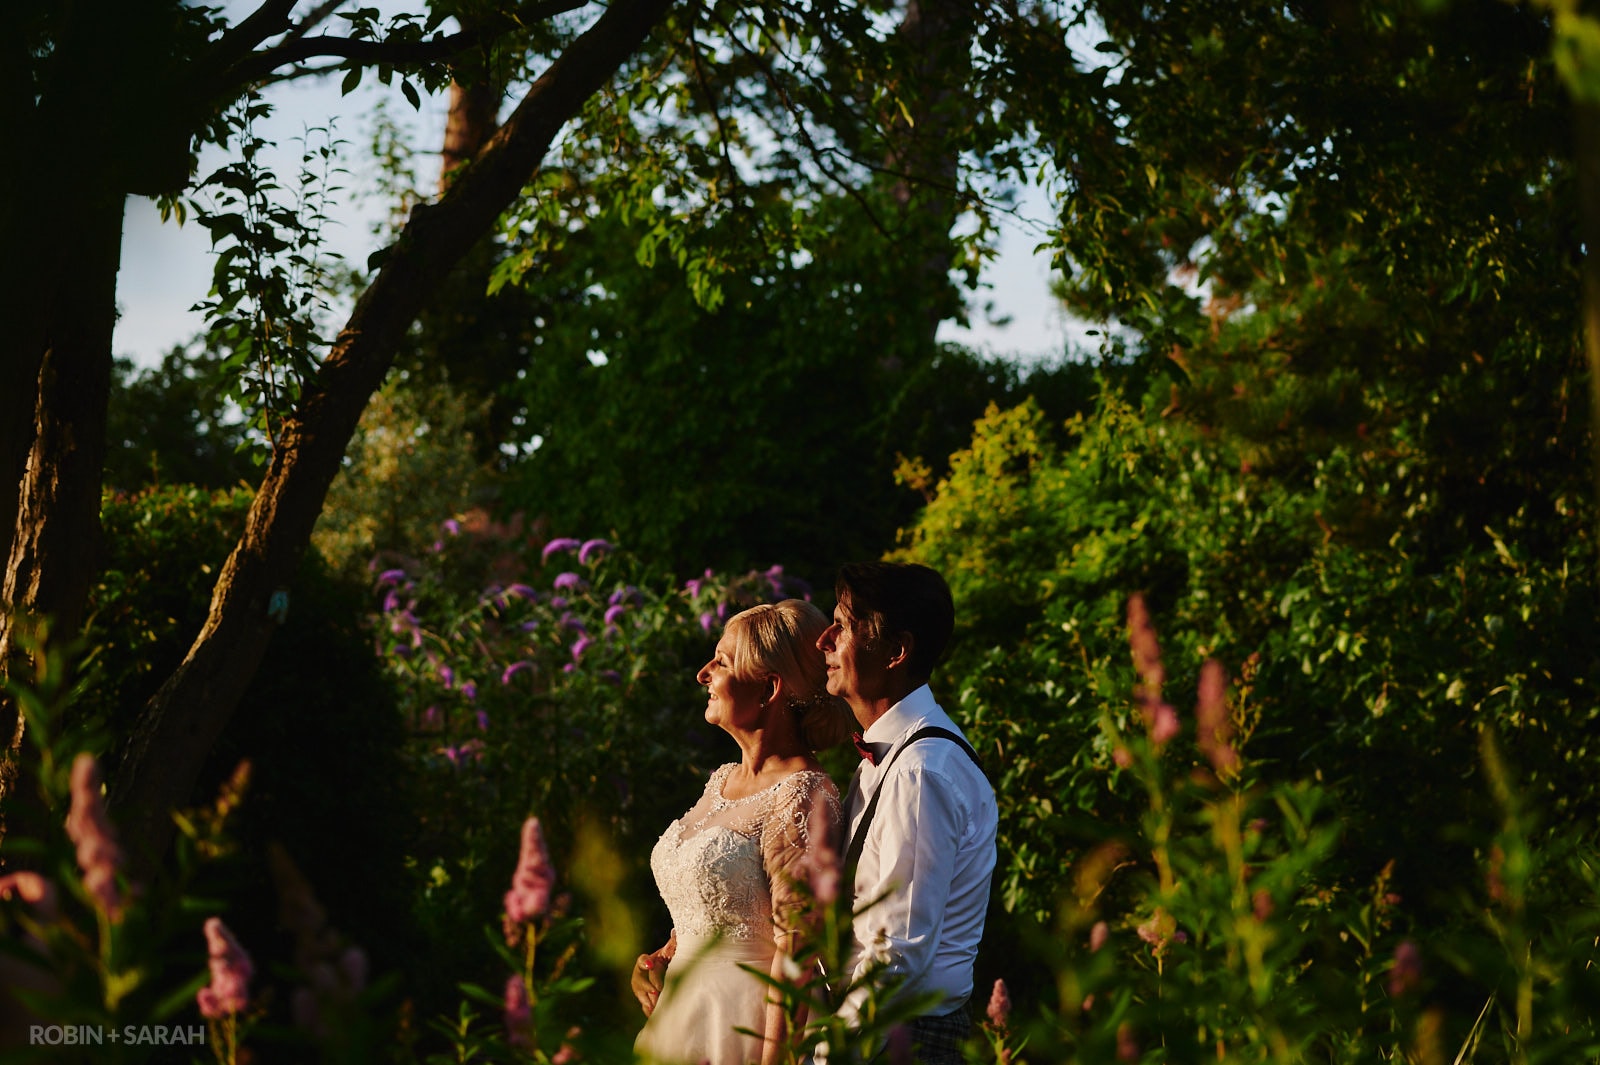 Bride and groom in beautiful gardens with evening light highlighting their faces